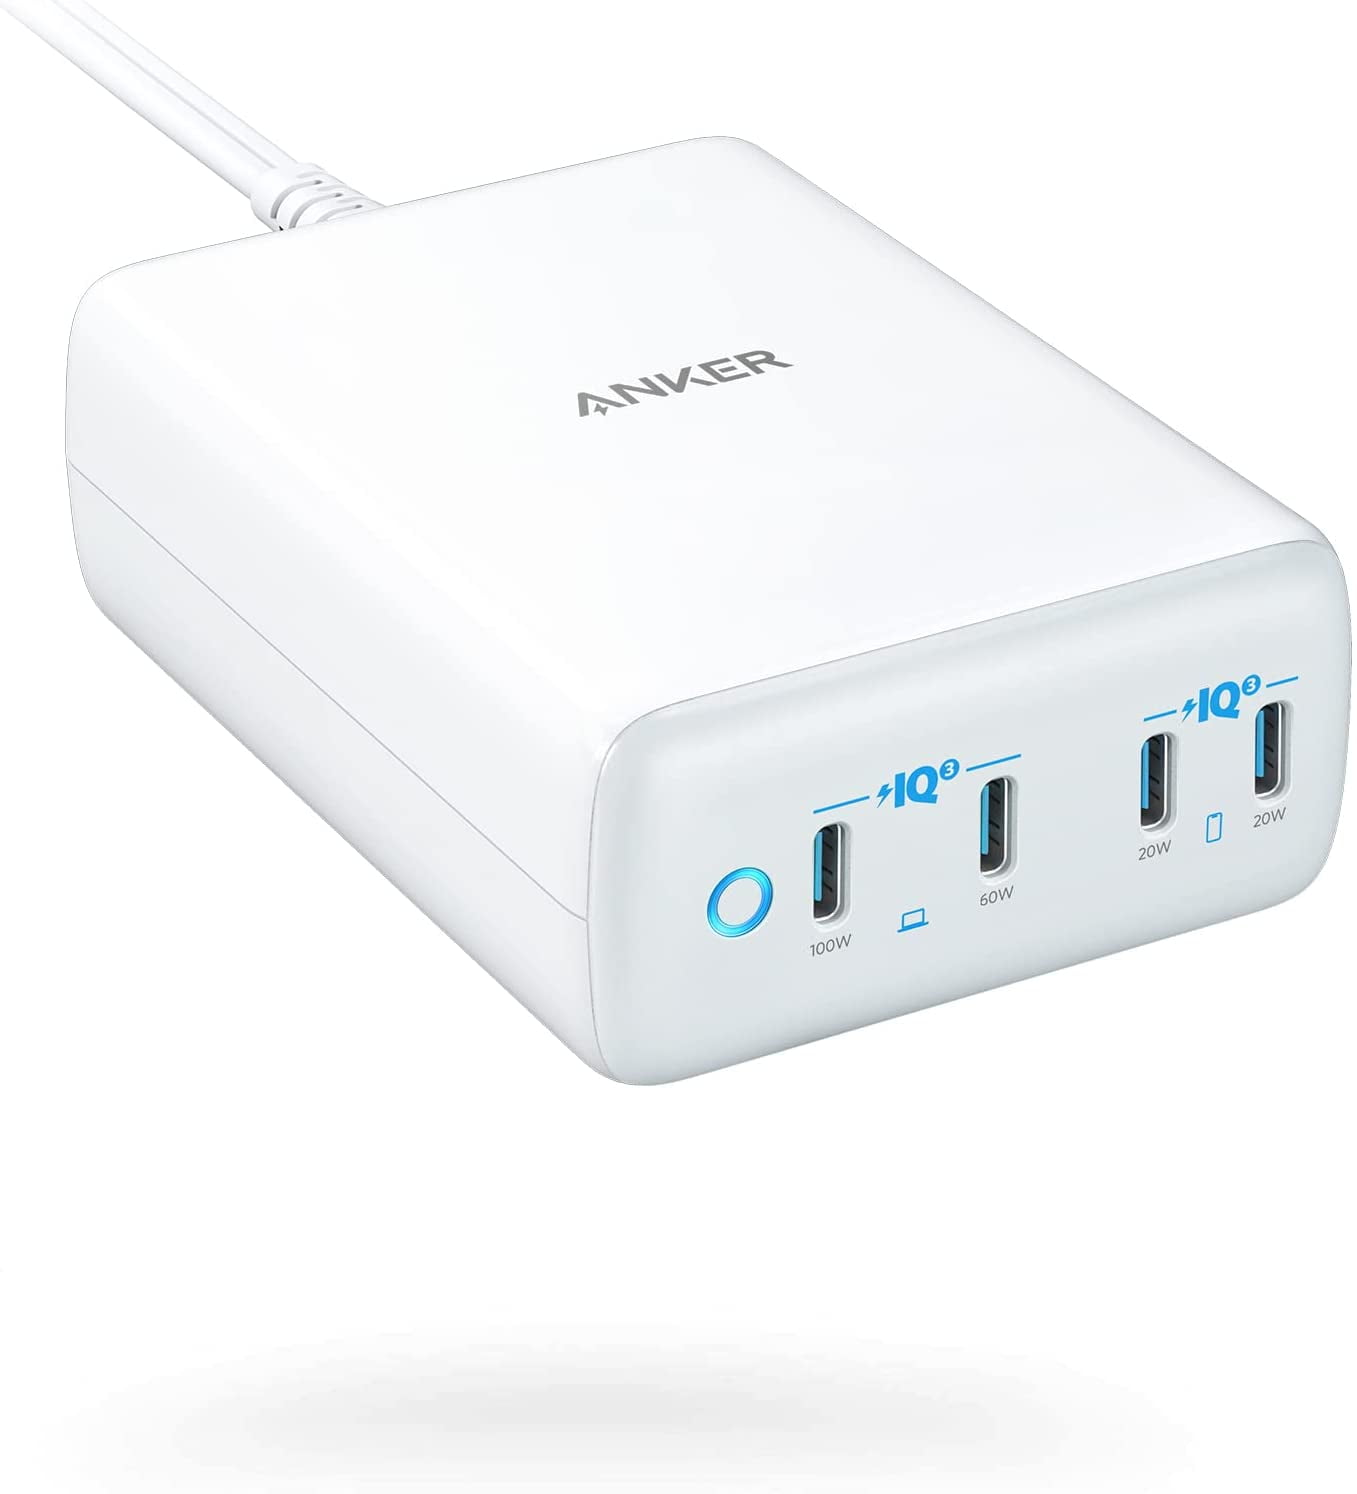  Anker 60W PIQ 3.0 & GaN Tech Dual Port Charger, PowerPort Atom  III (2 Ports) Travel Charger with a 45W USB C Port, for Laptops, MacBook,  iPad Pro, iPhone, Galaxy, Pixel